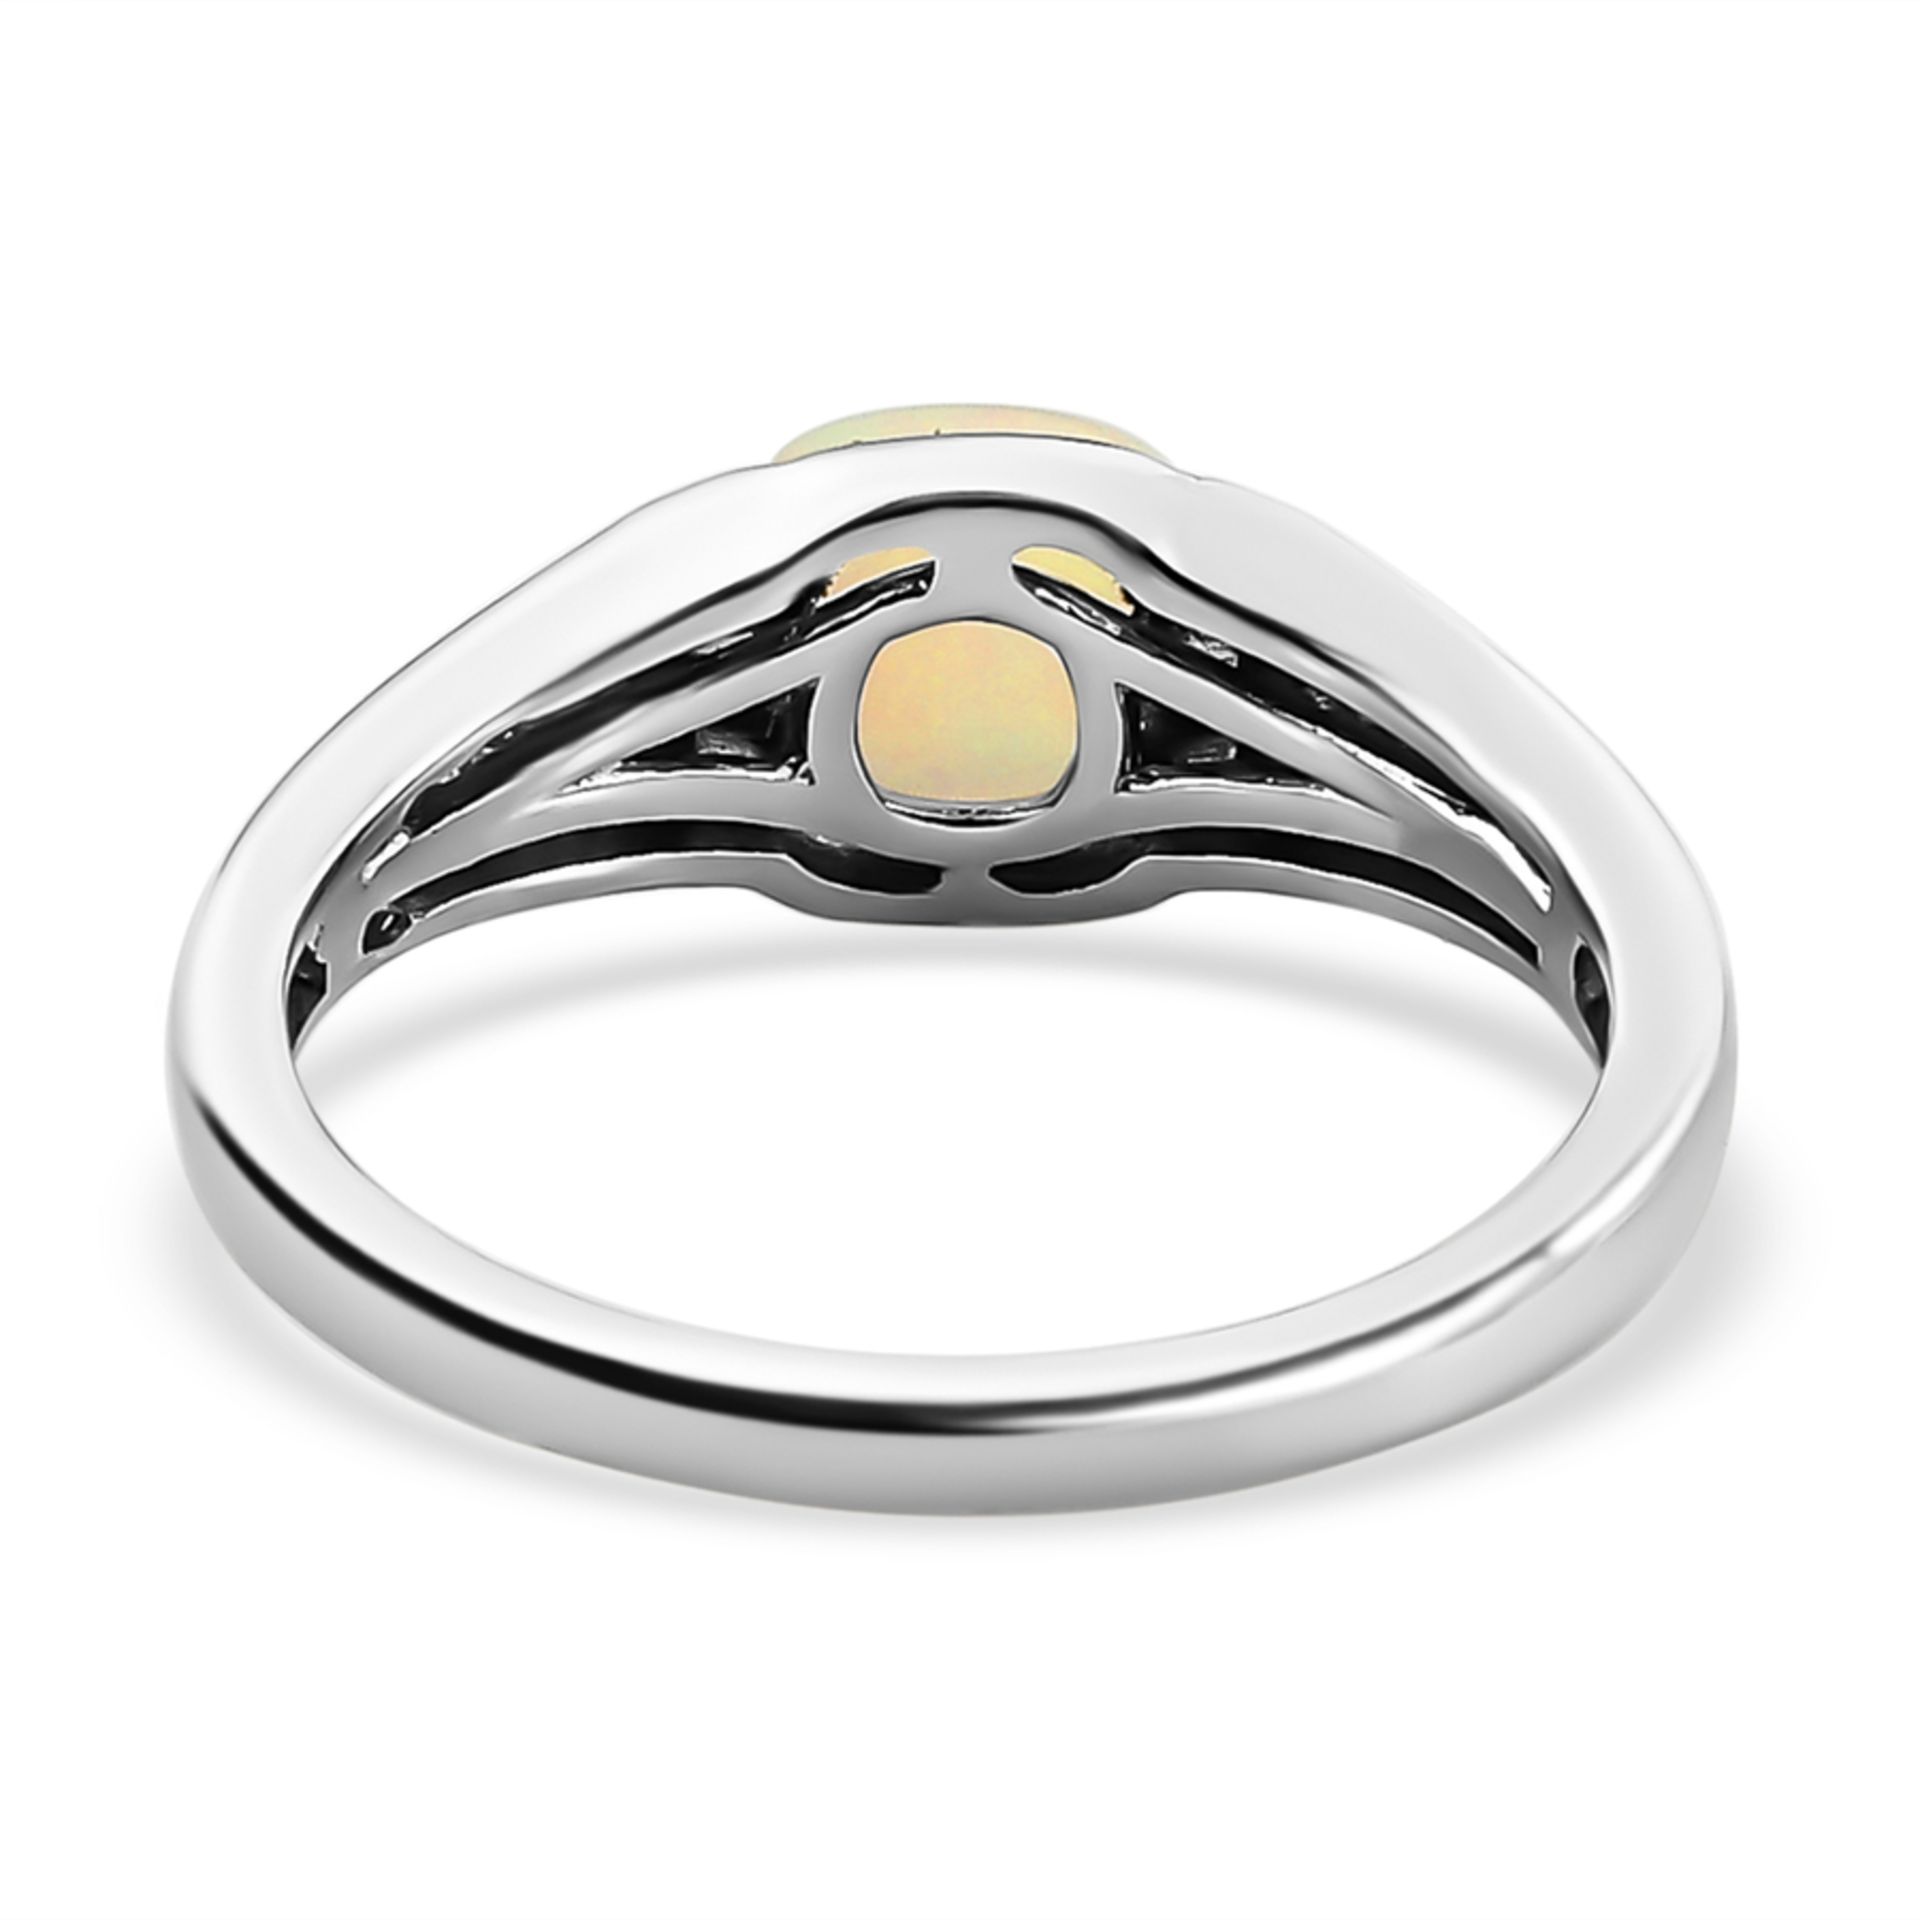 NEW!! Ethiopian Welo Opal Solitaire Ring in Platinum Overlay Sterling Silver - Image 4 of 4